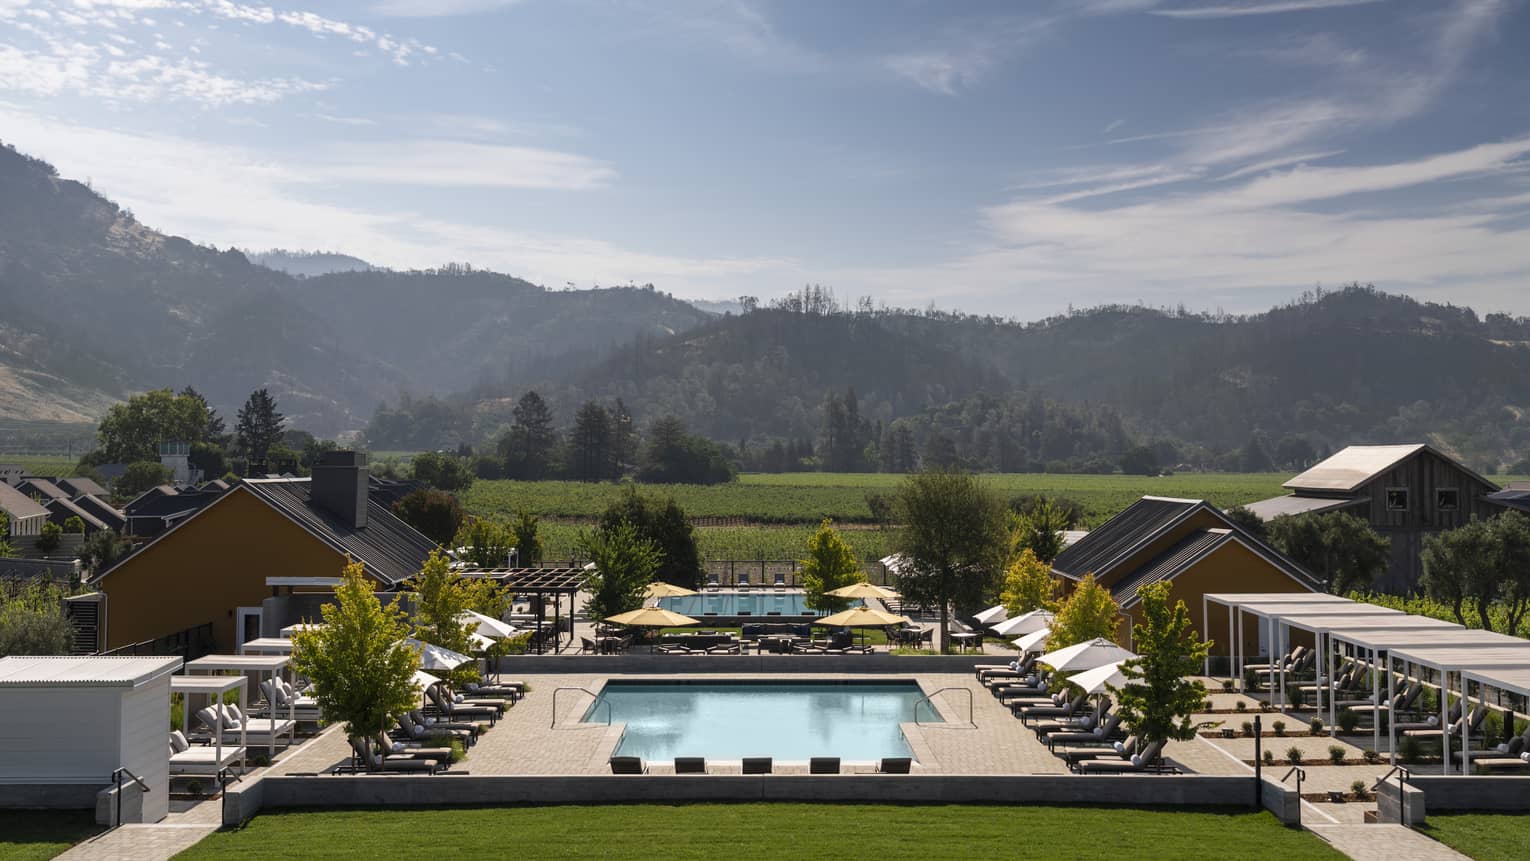 Resort pool in Napa Valley, lined with lounge chairs and mountains in distance